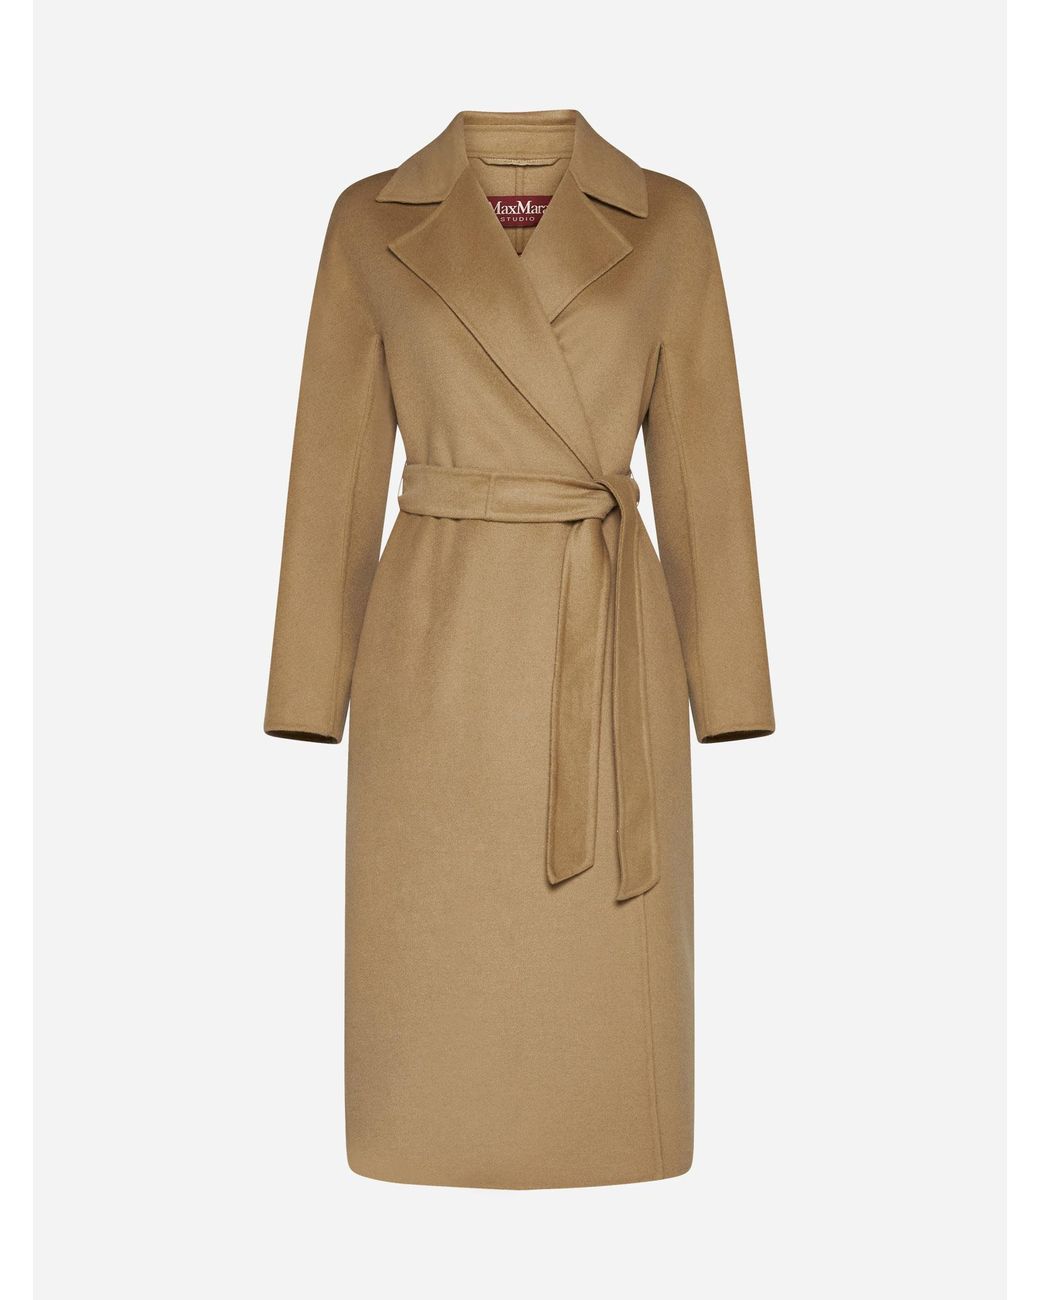 Max Mara Studio Cles Wool-blend Belted Coat in Natural | Lyst